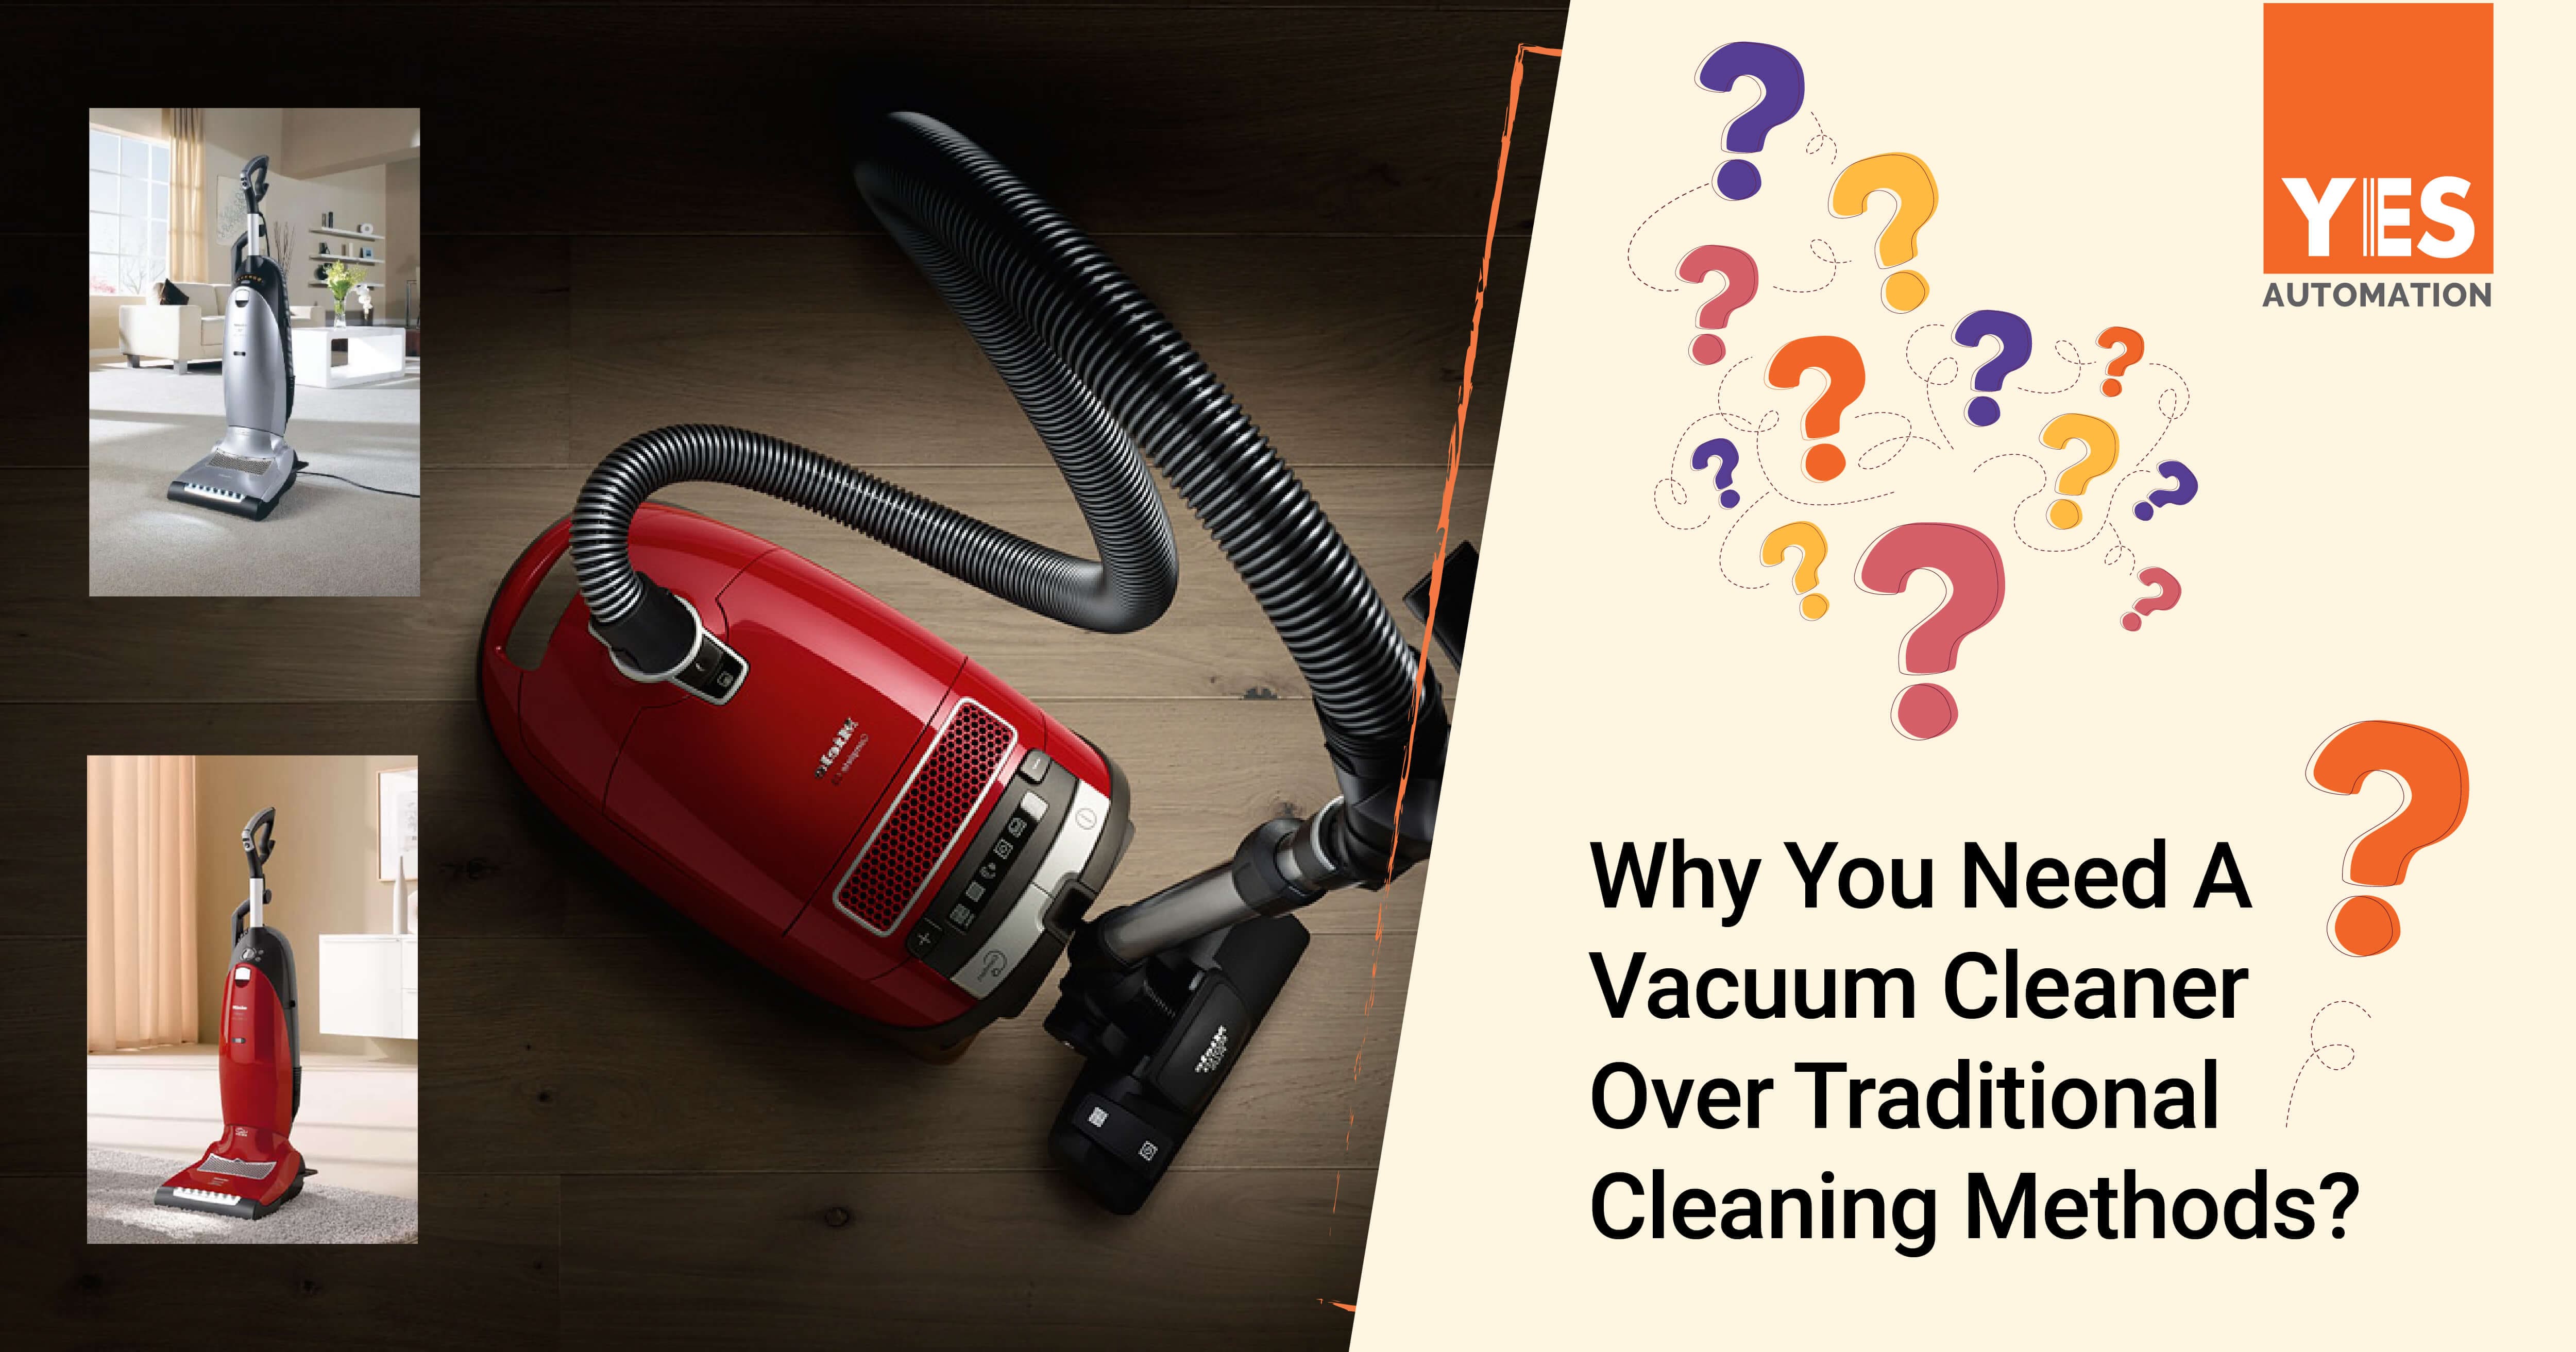 Why You Need A Vacuum Cleaner Over Traditional Cleaning Methods